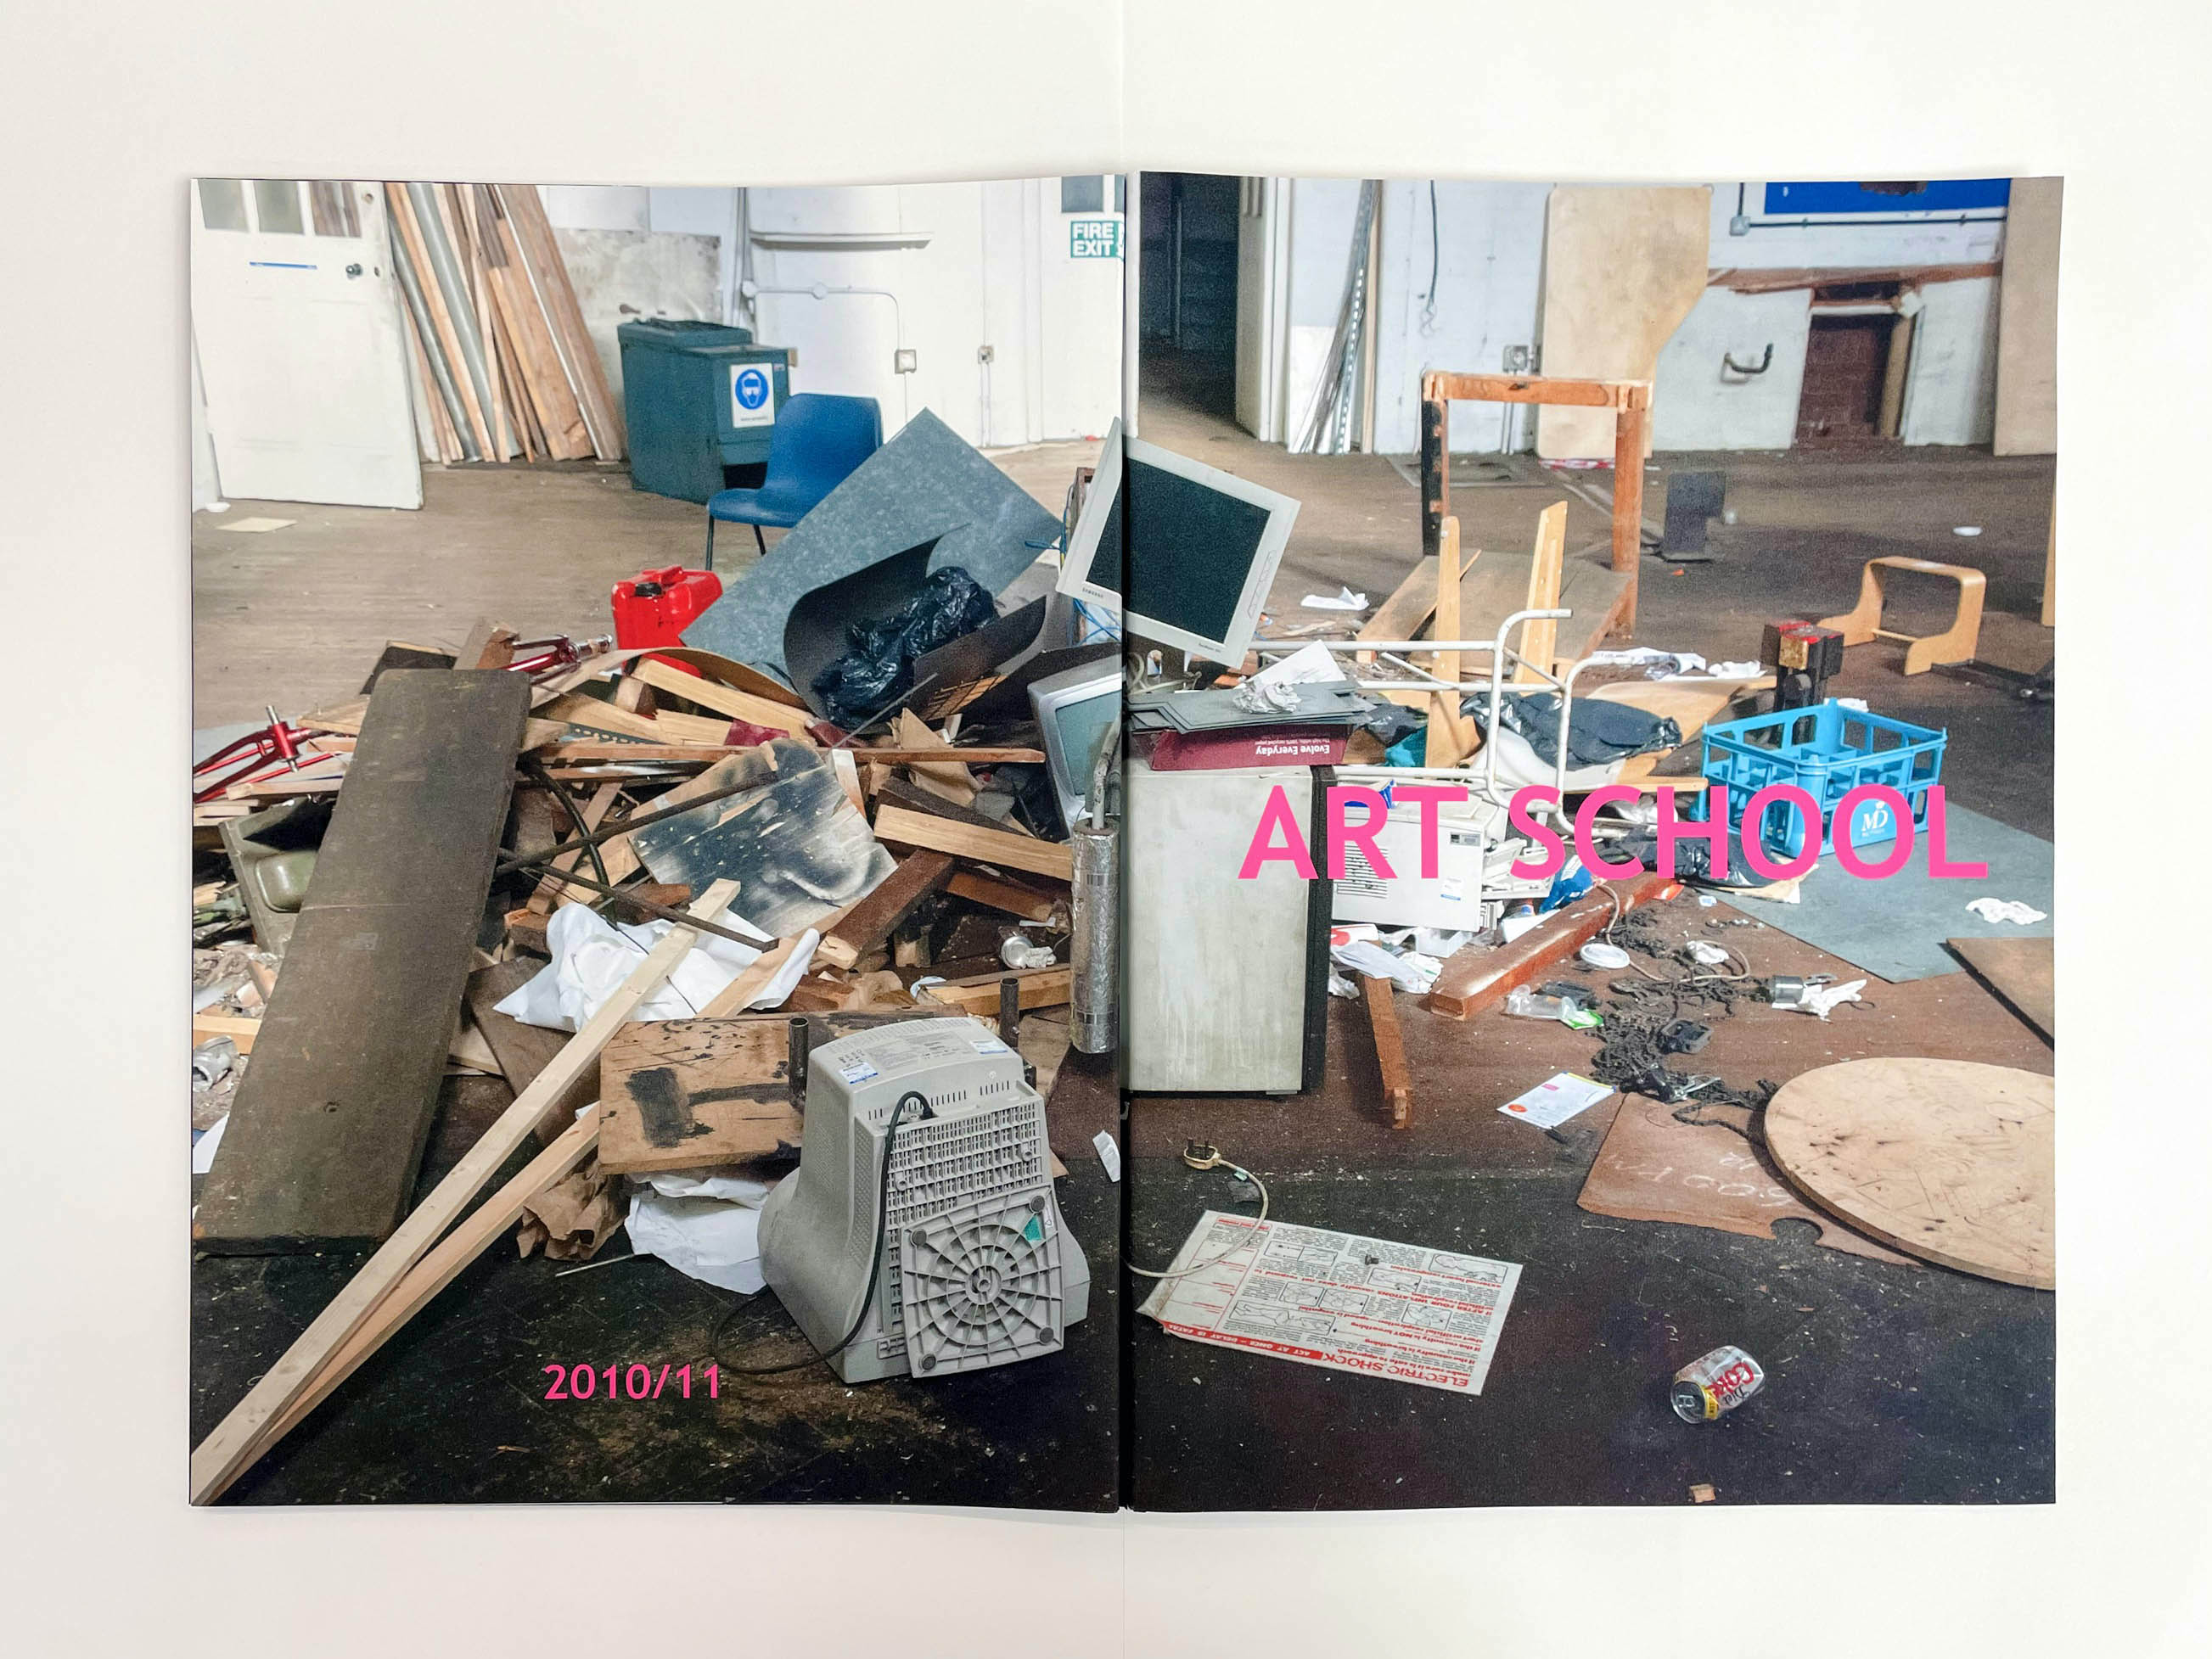 the whole cover of the book opened out, showing detritus in a large room, in smaller pink letters it says 2010/11 and large letters Art School